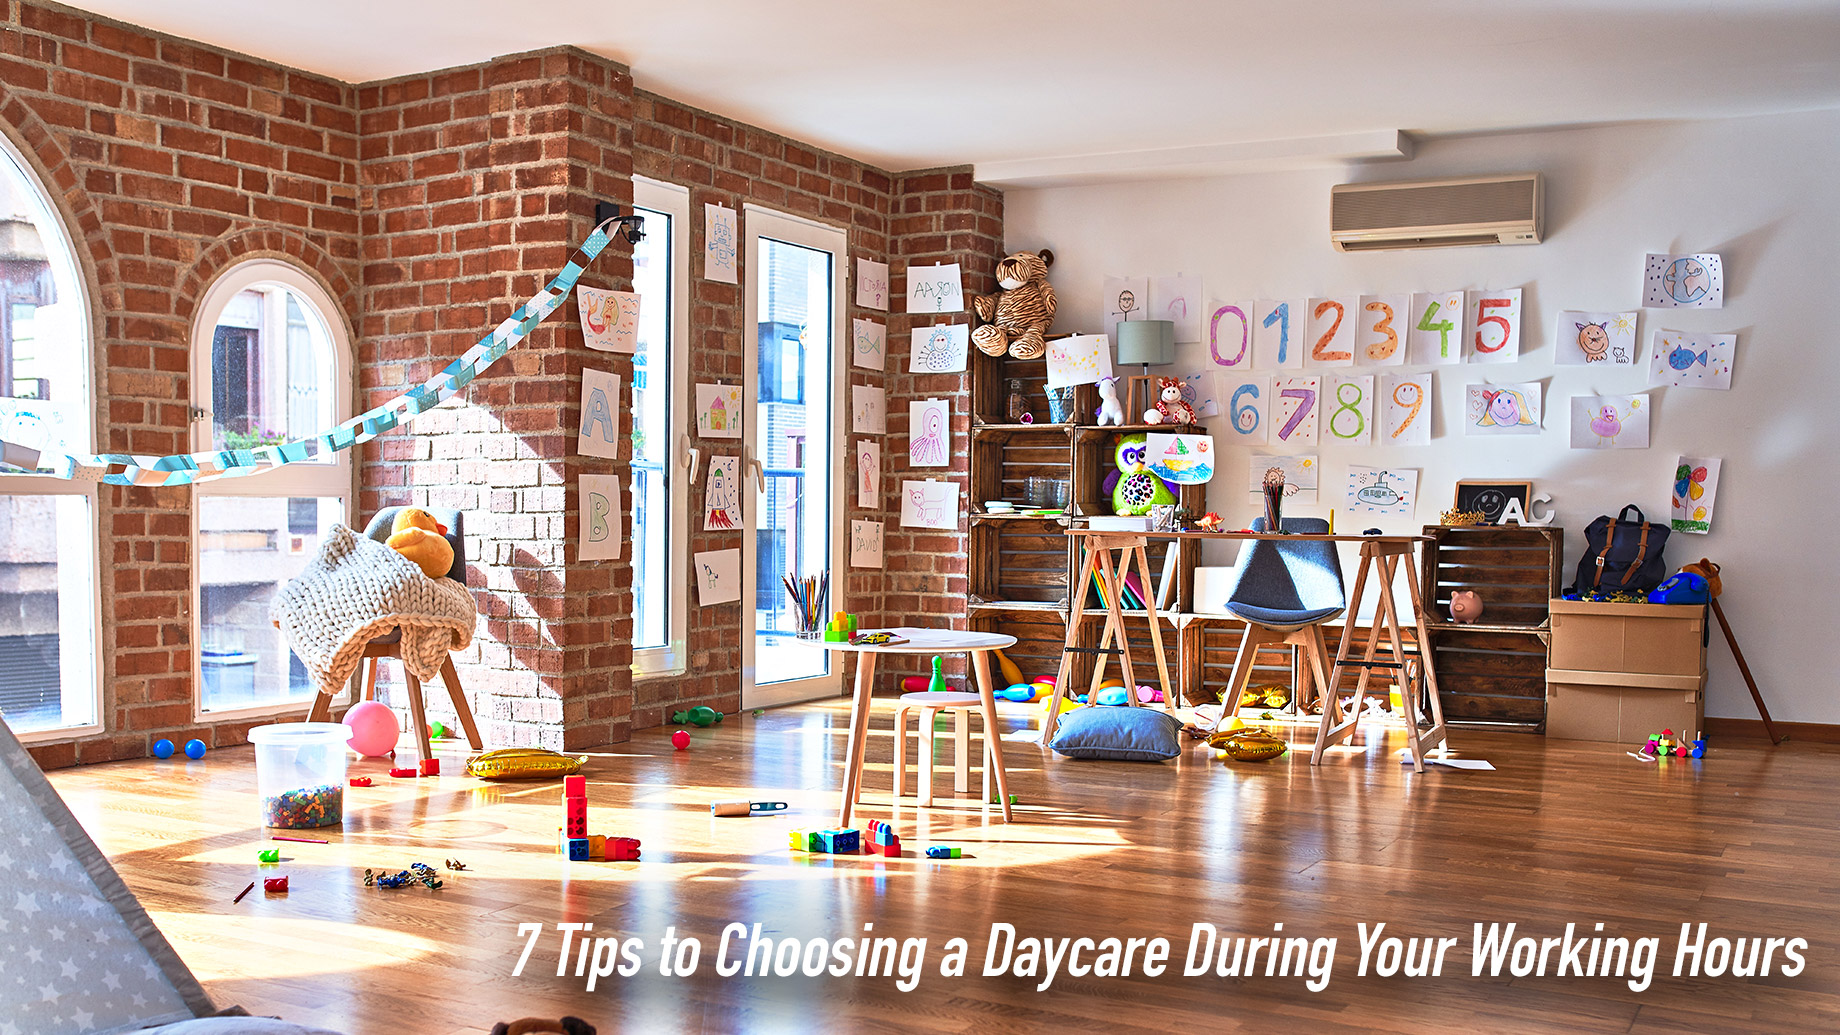 7 Tips to Choosing a Daycare During Your Working Hours